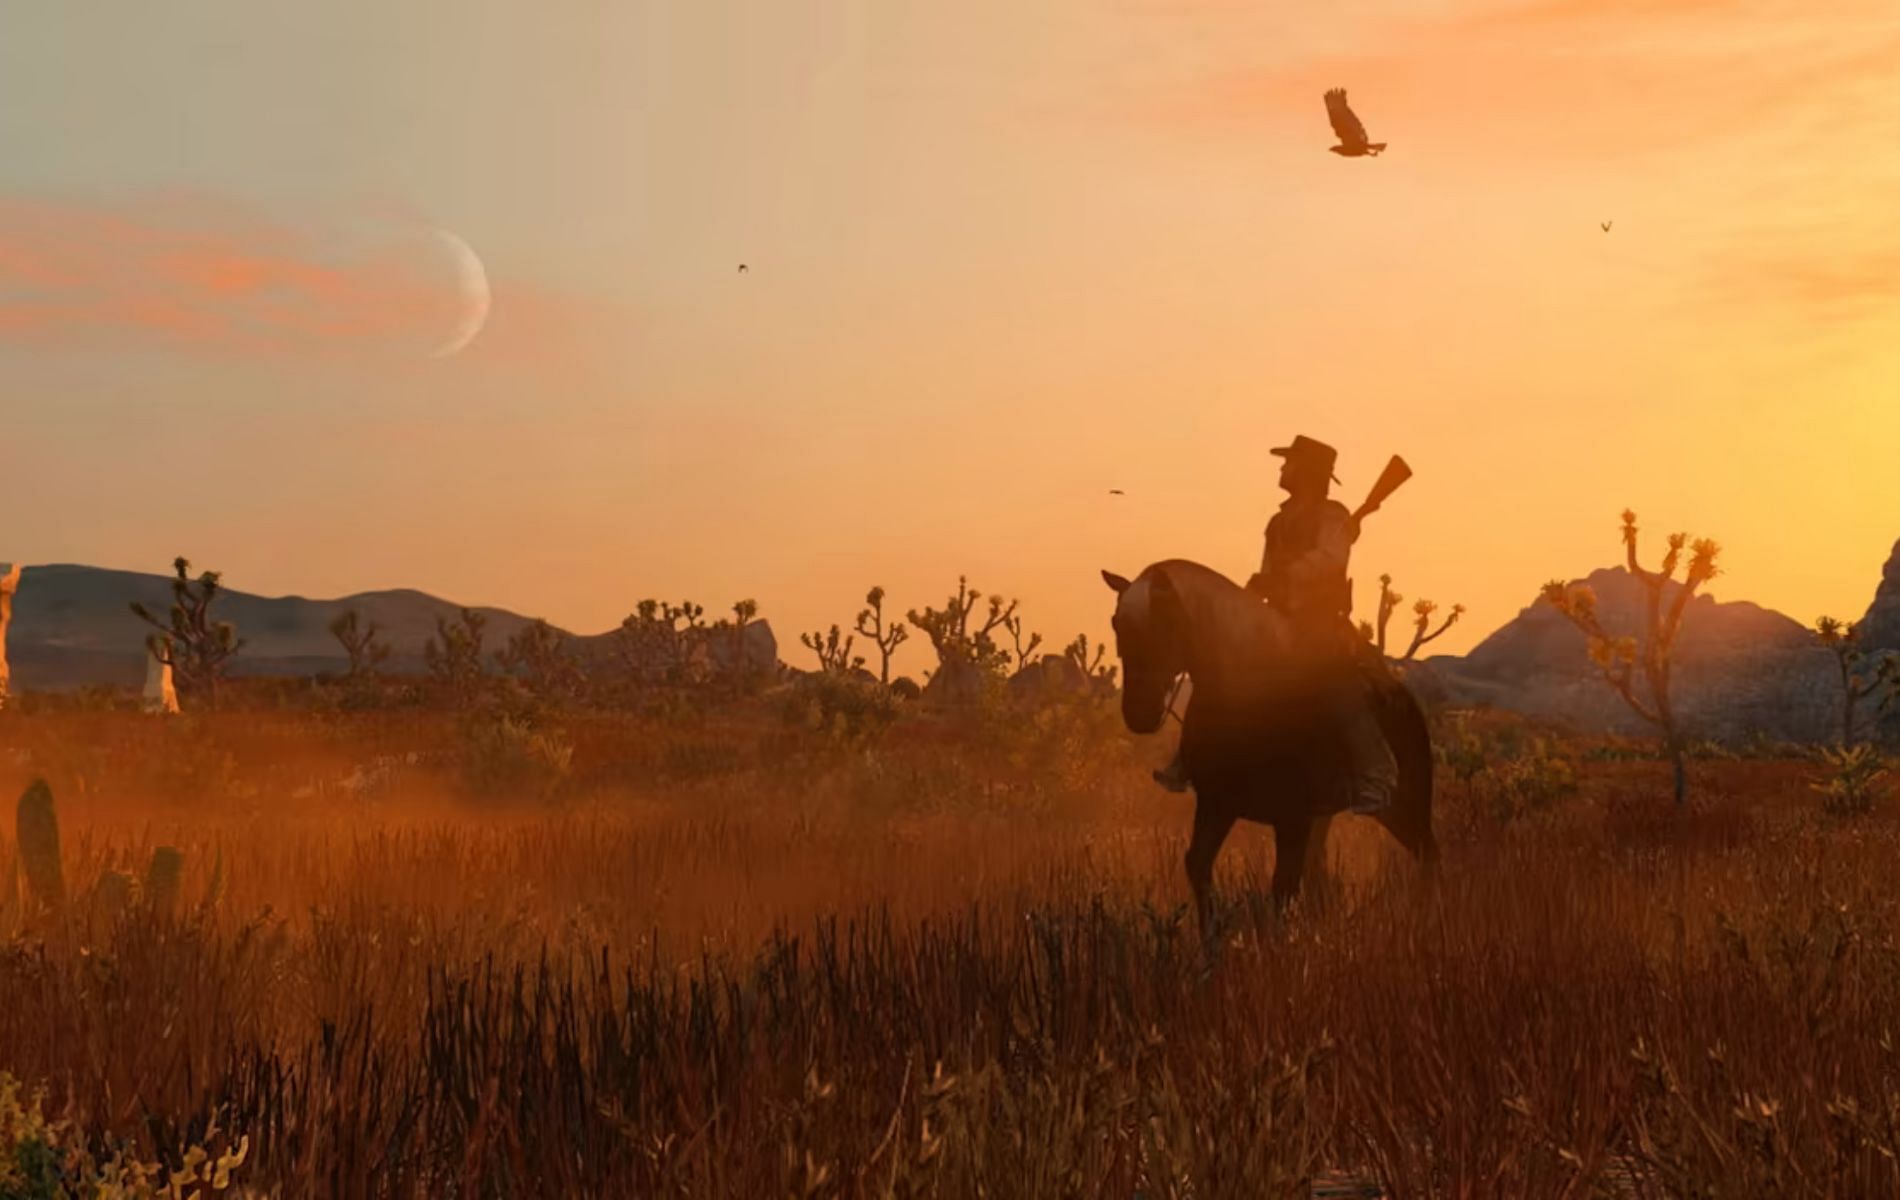 Red Dead Redemption PS4 port is 'blatant greed' say angry fans